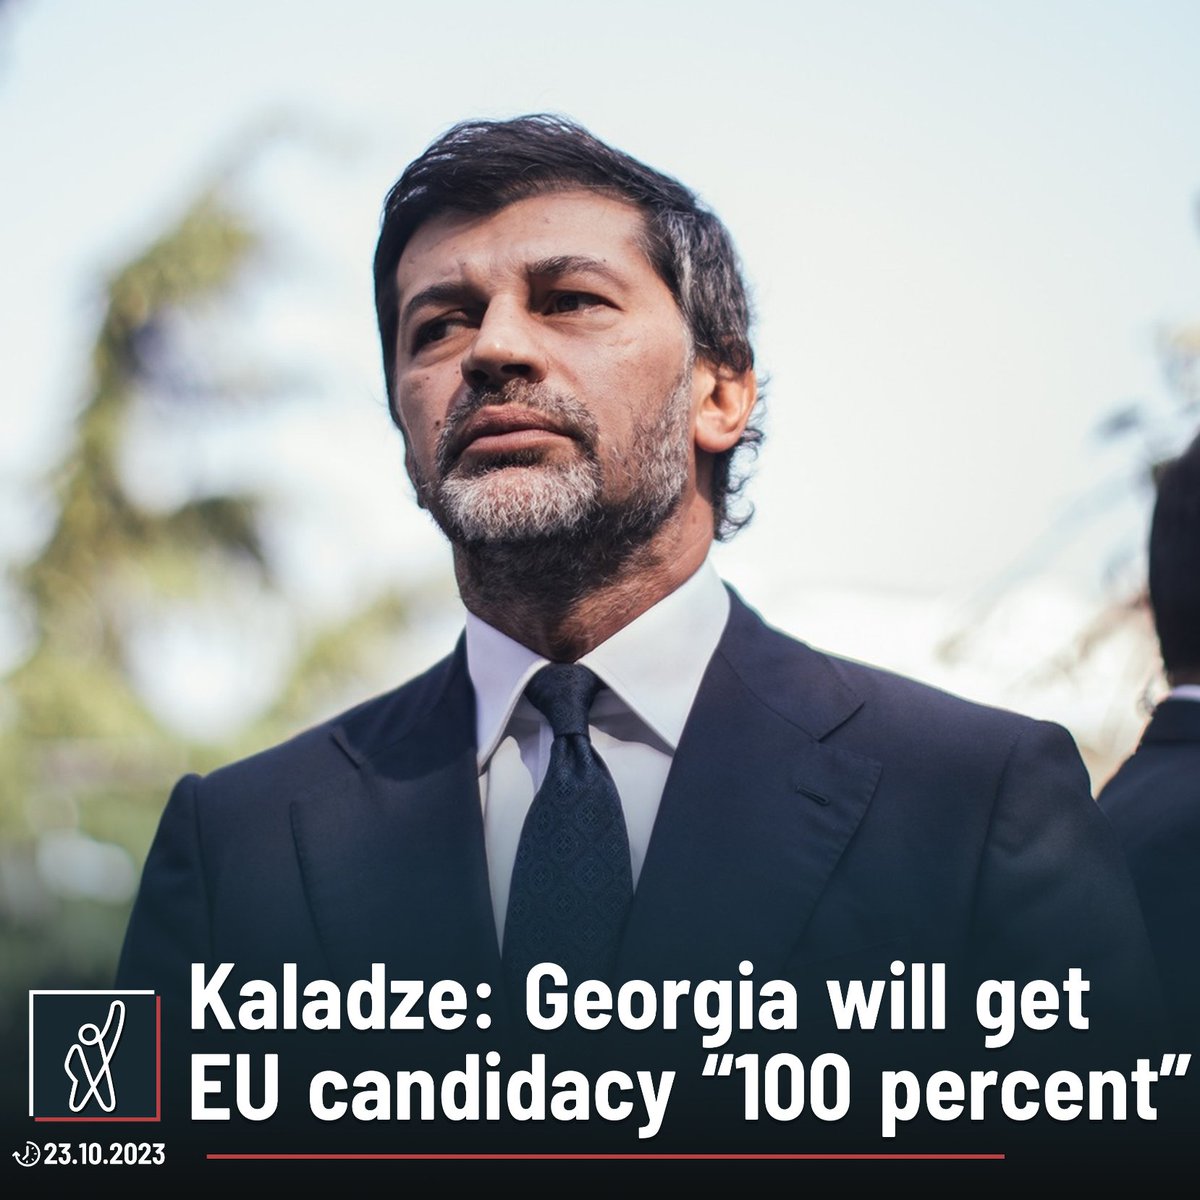 “Although the entire radical opposition is trying so that the country doesn’t get the EU candidate status, I want to tell you that Georgia will get the EU candidate status. I say this with 100% certainty that our country will get the candidate status. All has been done and there…